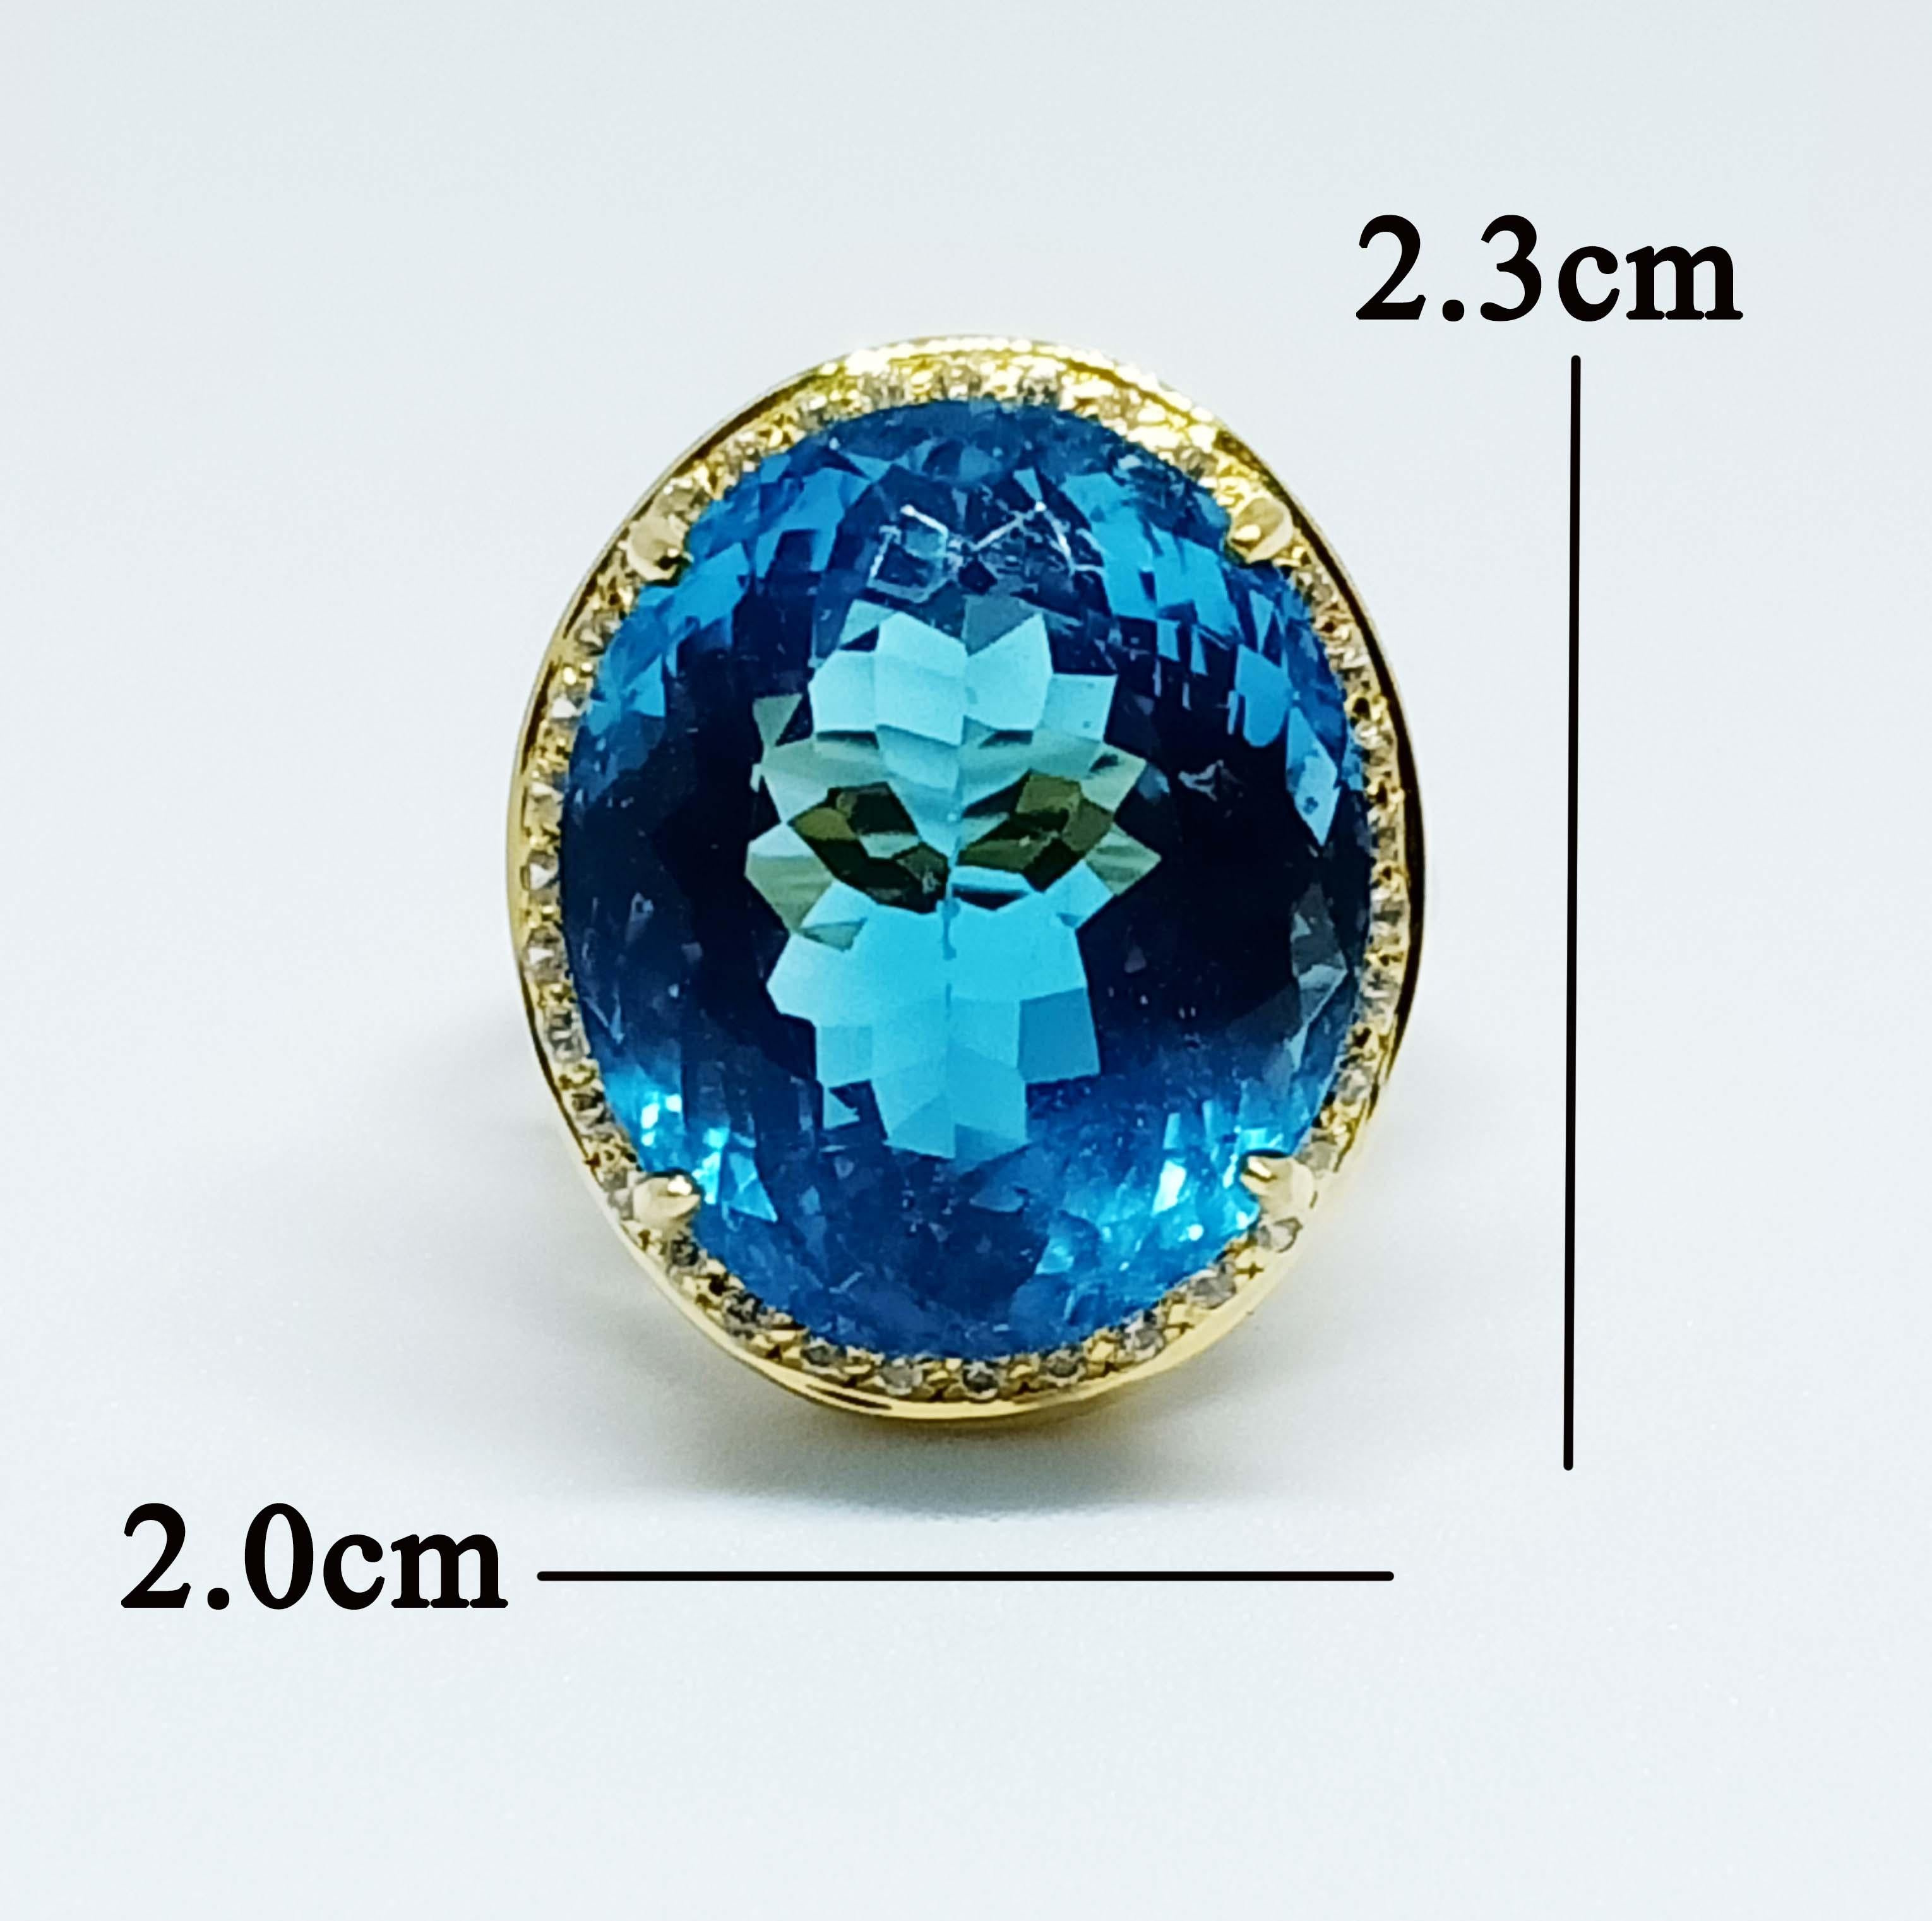 Swiss blue topaz Oval 20x17 mm.  25.19 cts
White Zircon RD. 1.25 mm. 35 pcs.
Sterling silver in 18K Gold Plated.
Size 7.25 us.